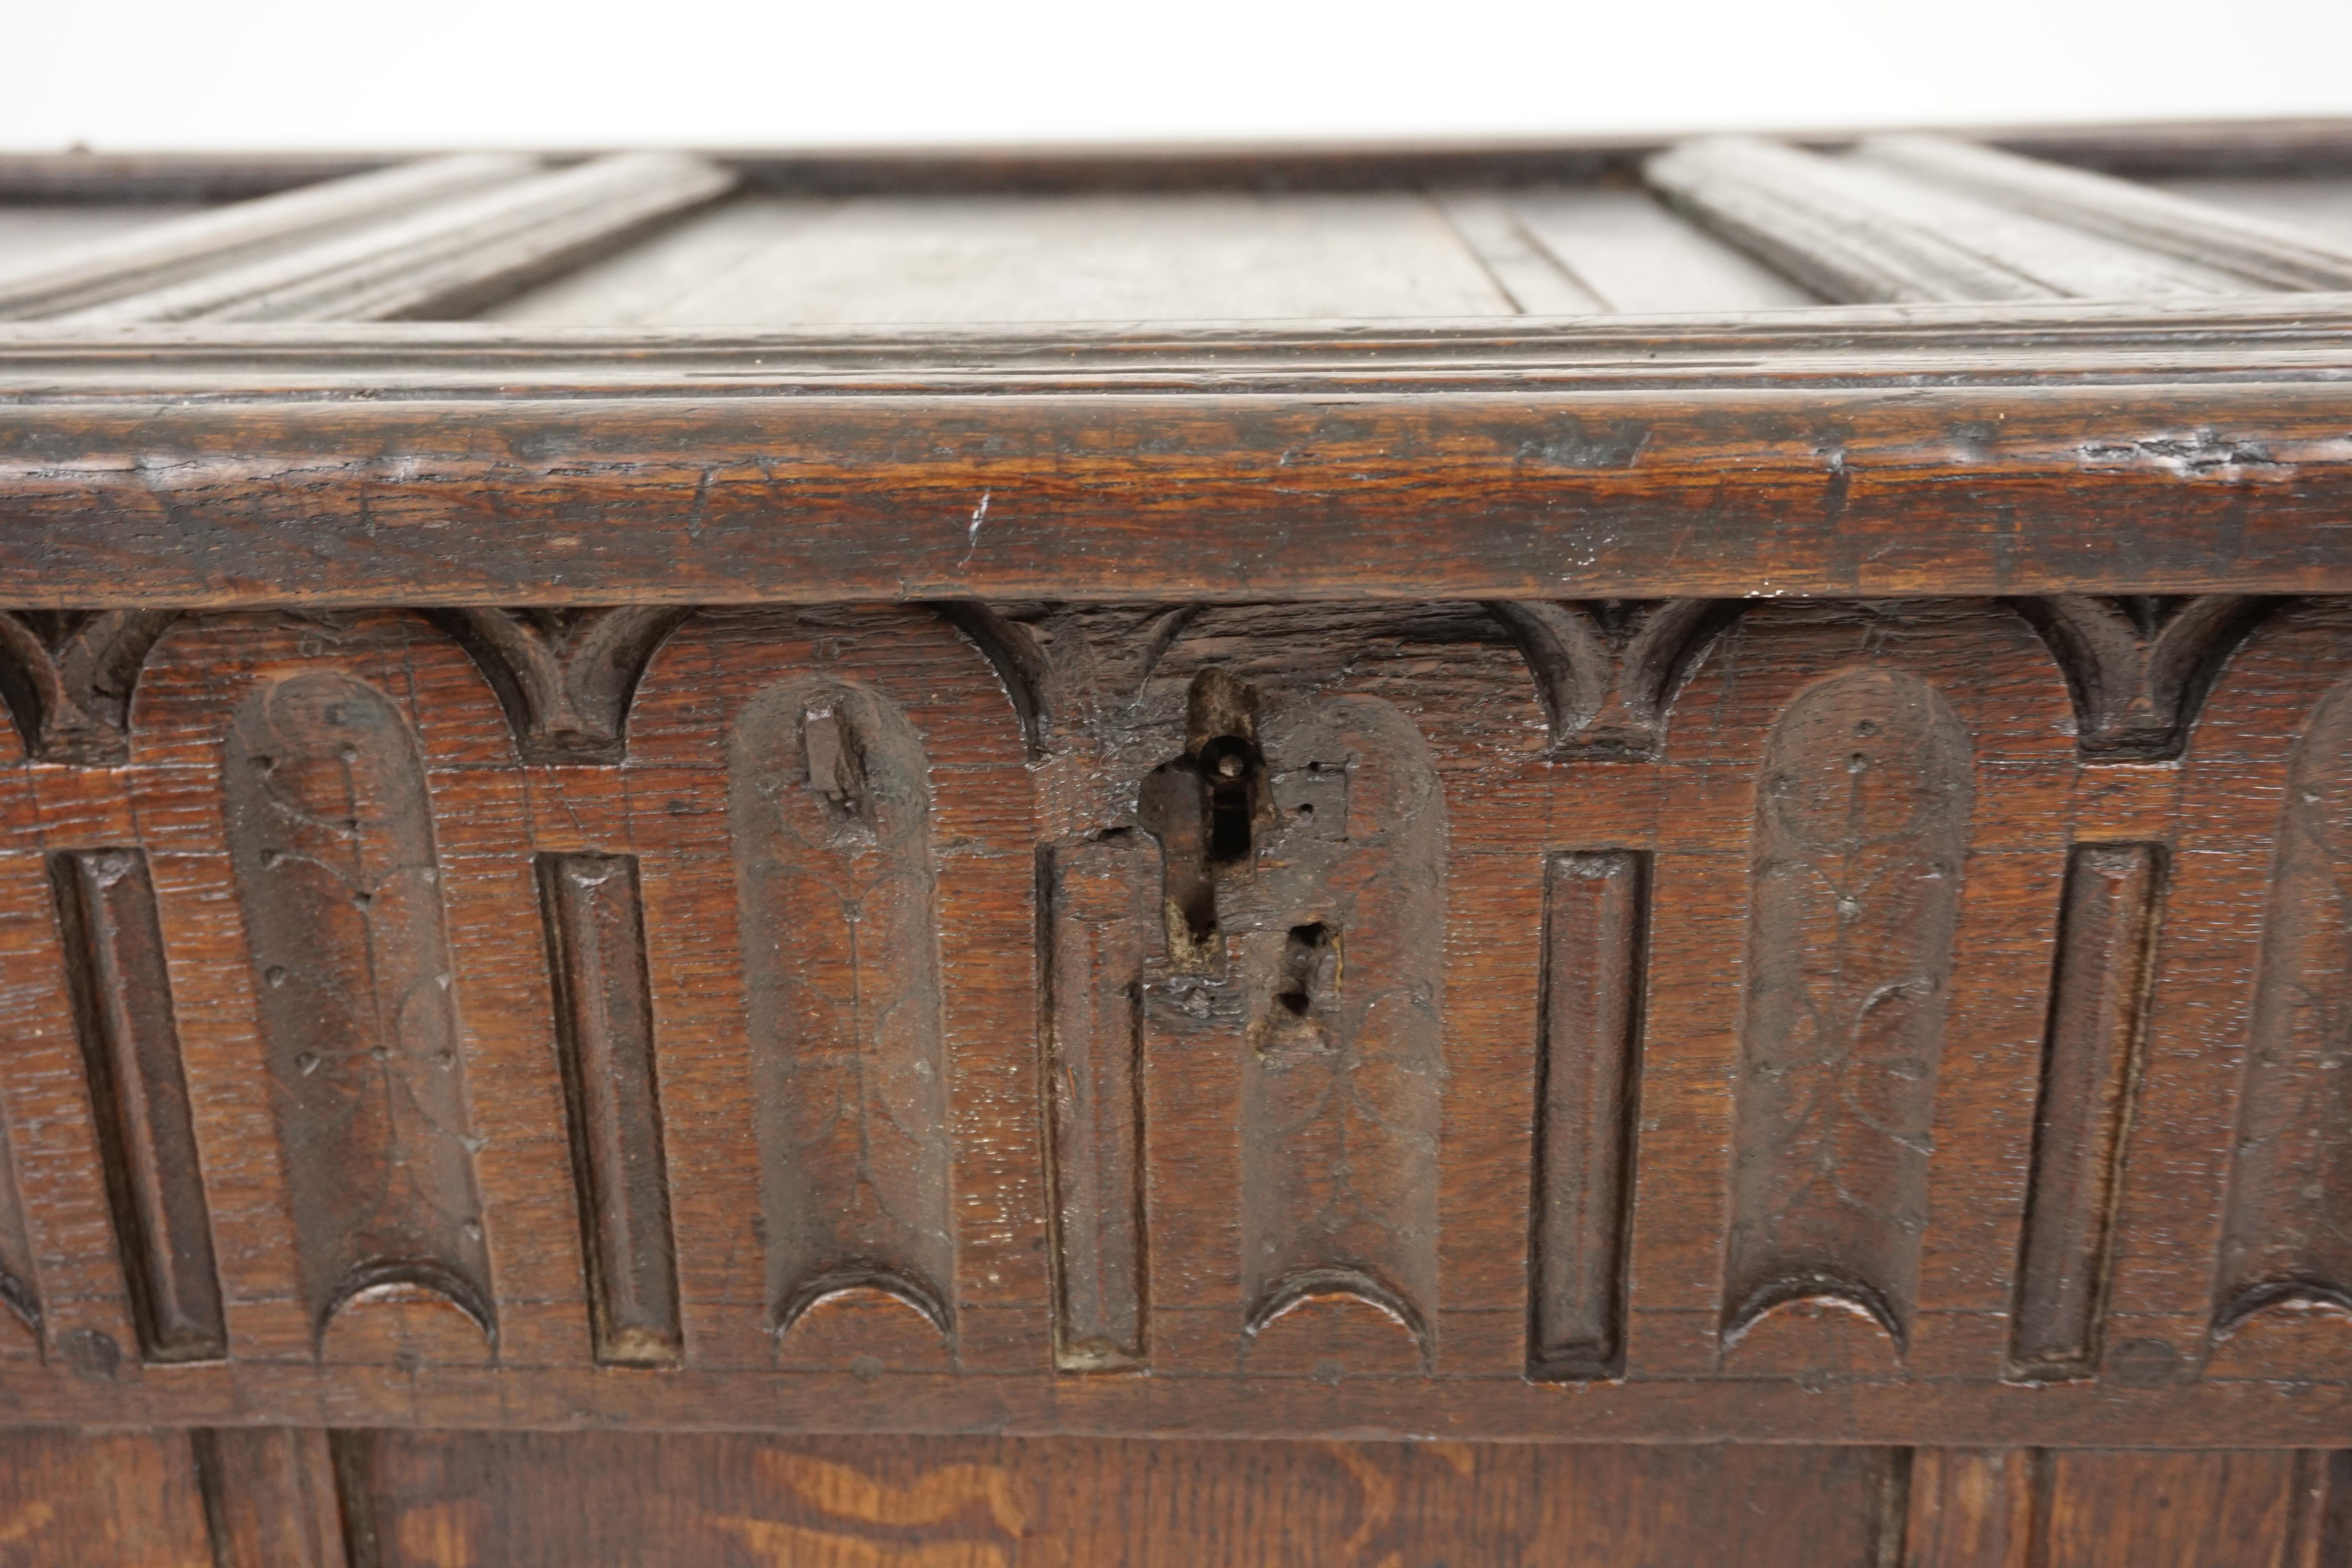 Antique oak coffer, Georgian Kist Trunk, Antique Furniture, Scotland 1780, B1842

Scotland, 1780
Solid oak
Original finish
Triple panel top
Typical carved frieze to the top
With Three vertical panels to the front
The lid with scribed edge